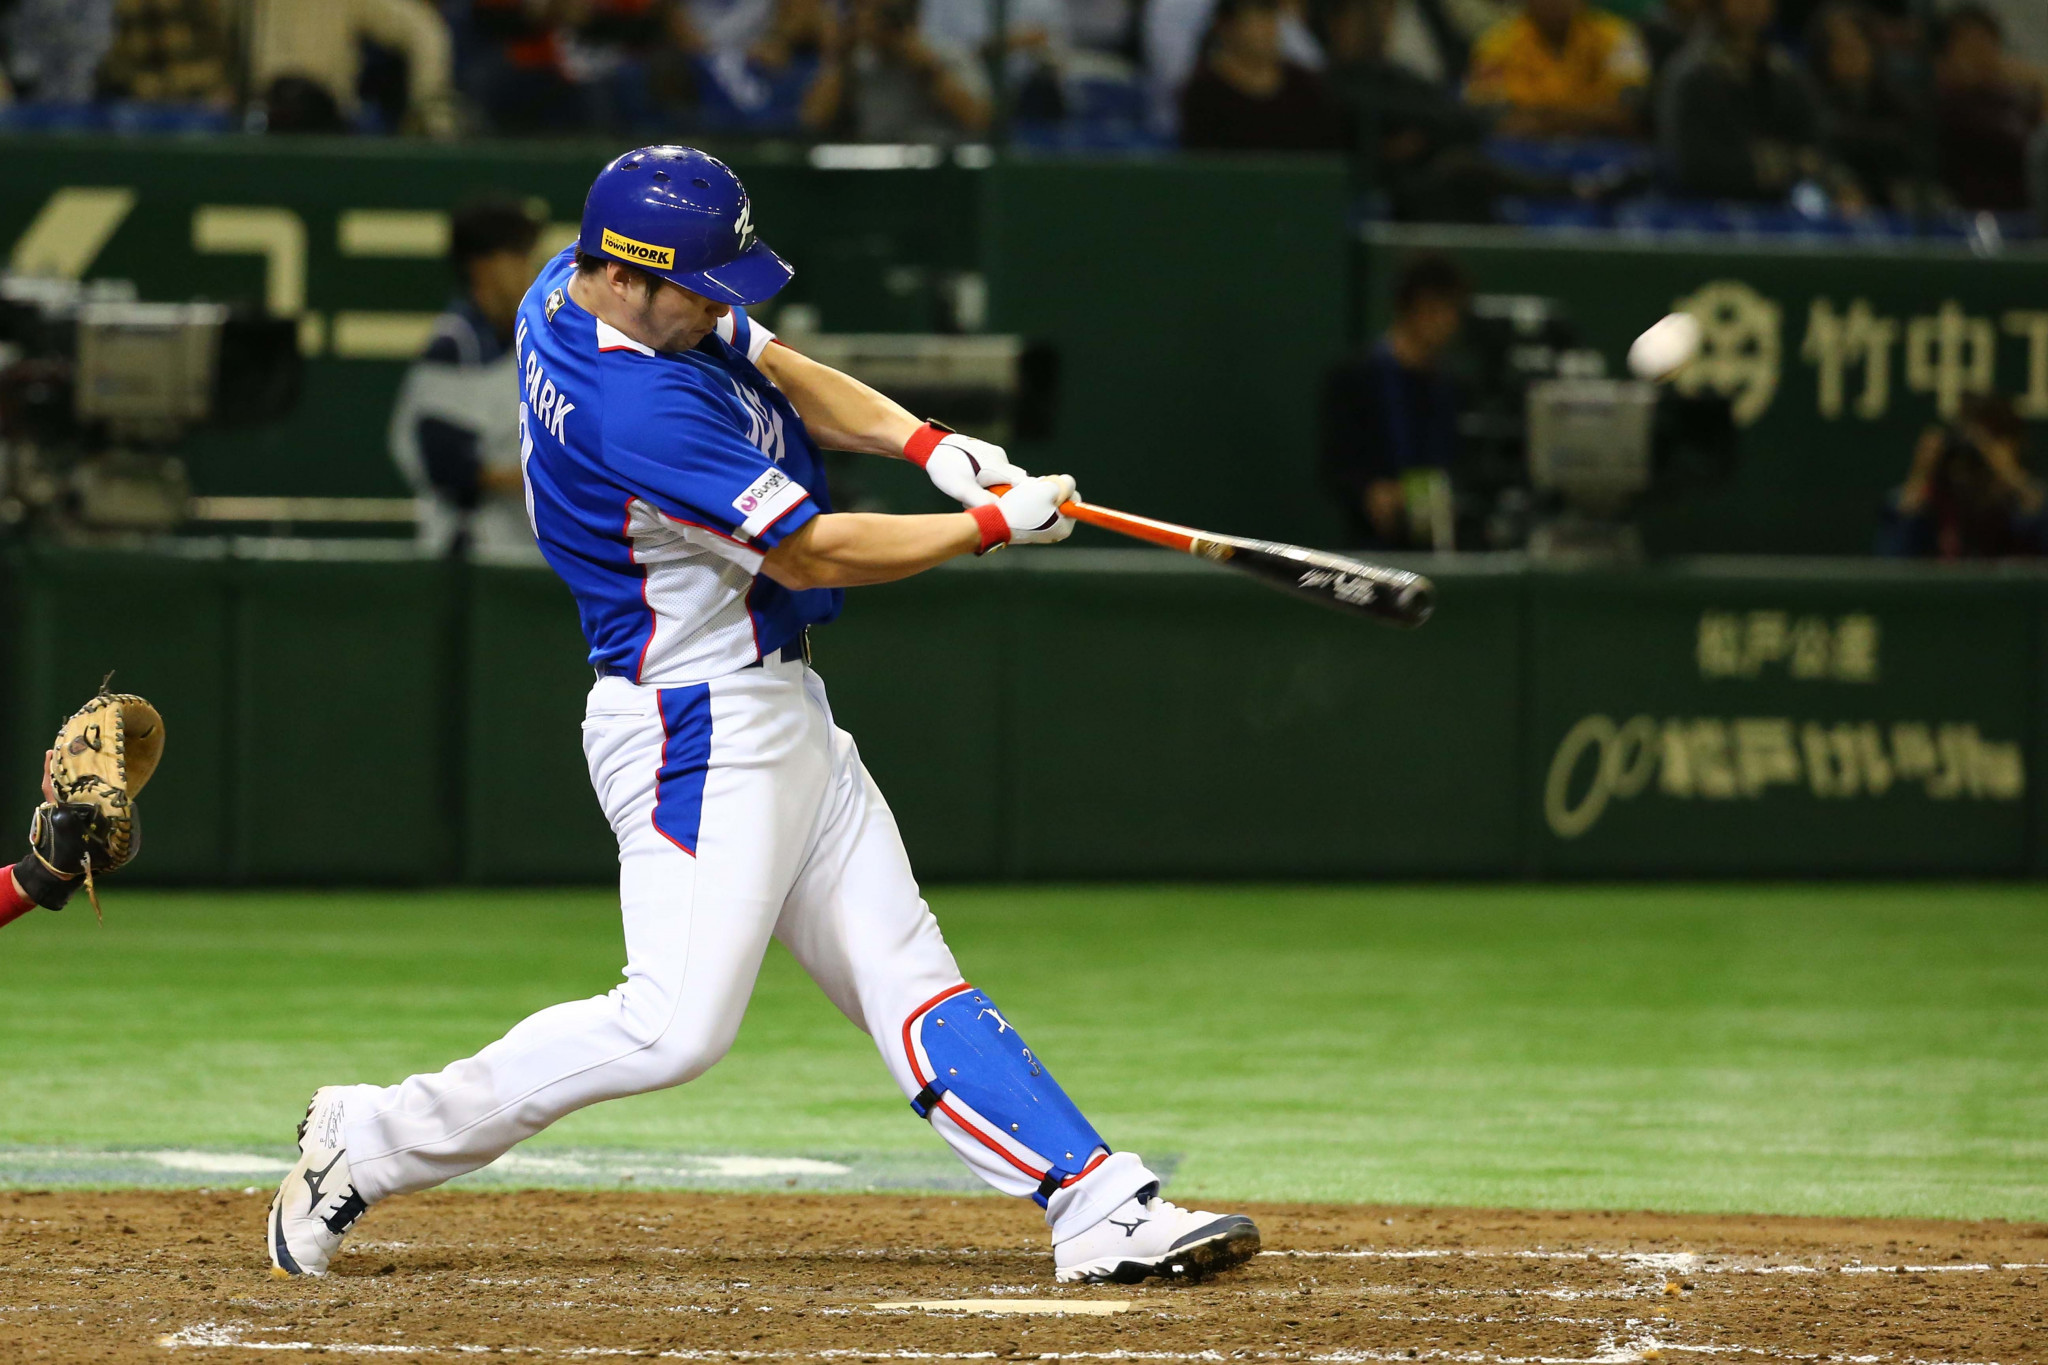 WBSC announce locations and groups for Premier12 event